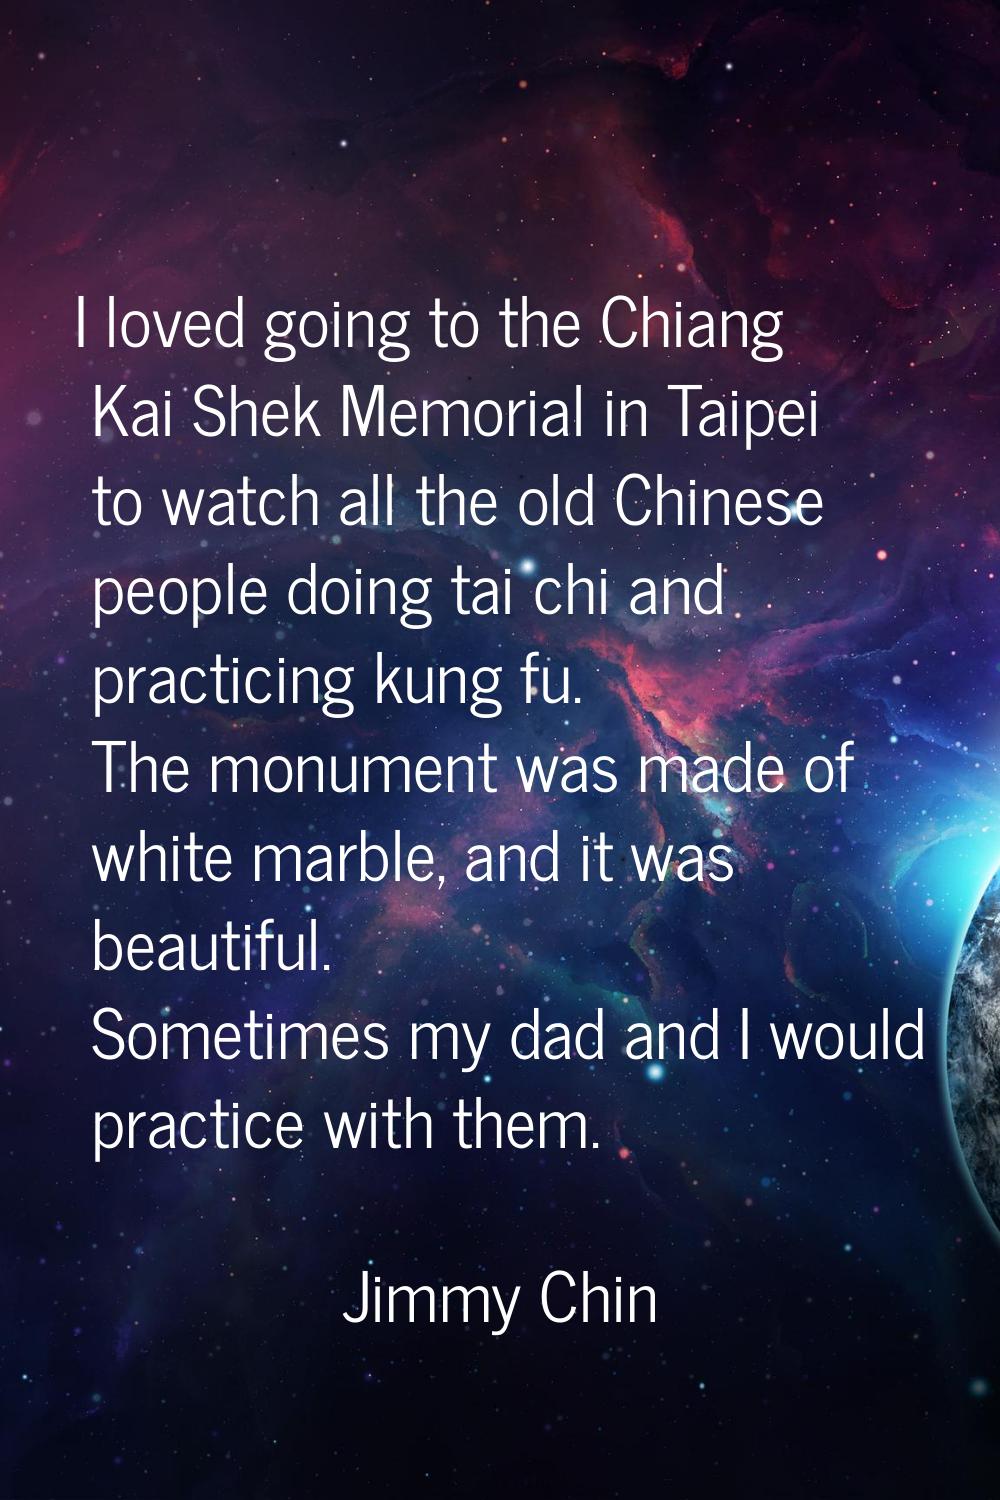 I loved going to the Chiang Kai Shek Memorial in Taipei to watch all the old Chinese people doing t